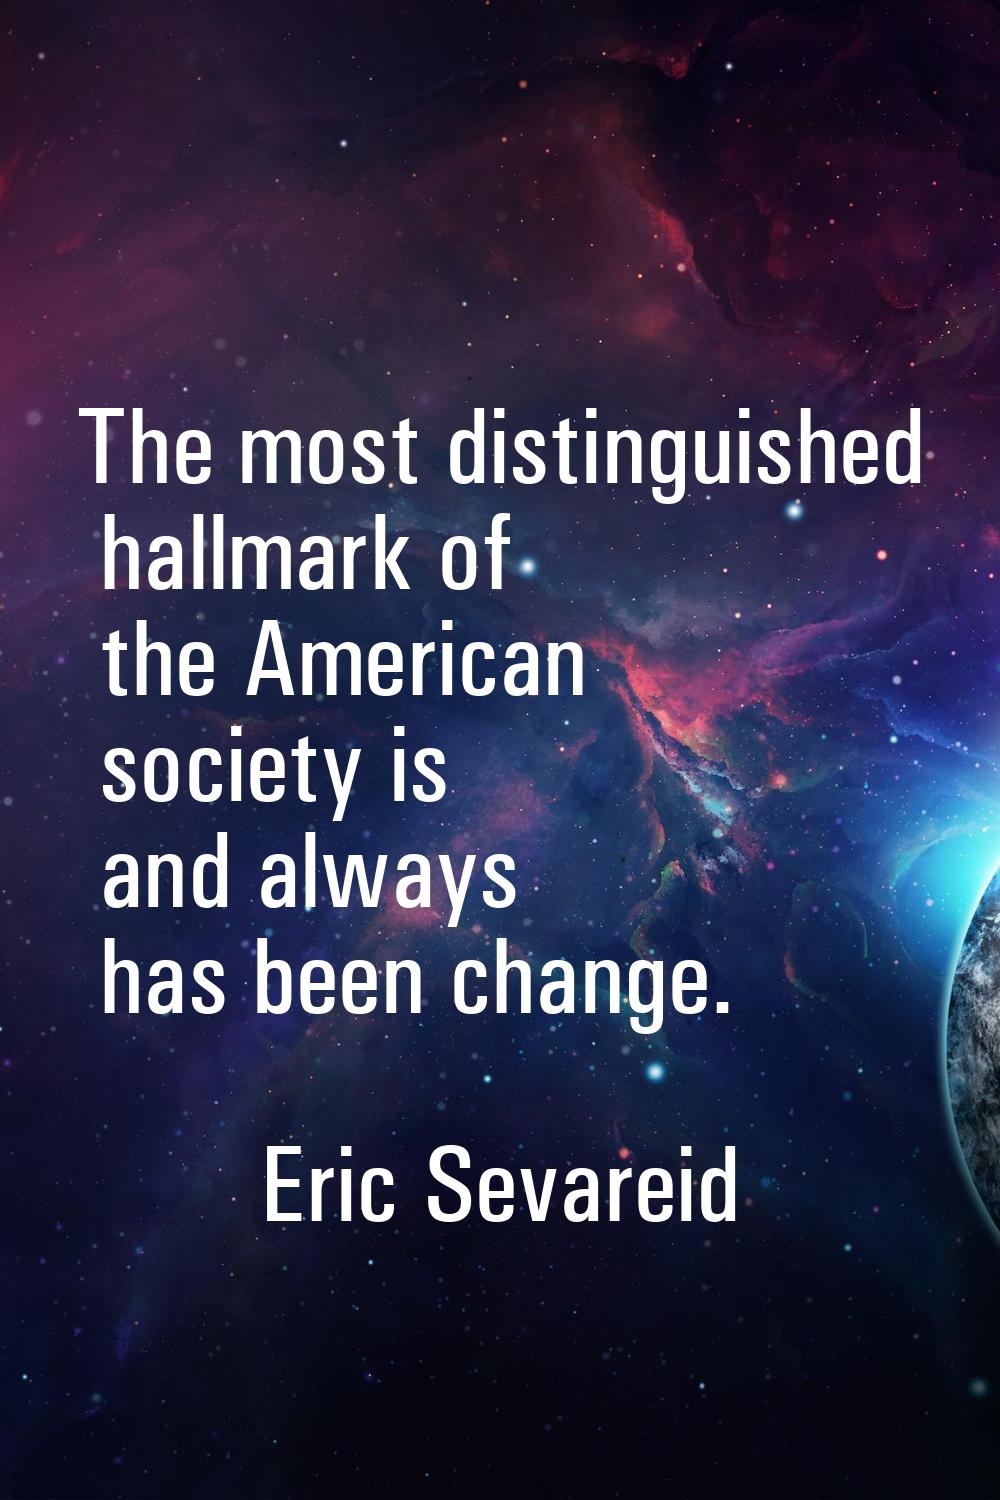 The most distinguished hallmark of the American society is and always has been change.